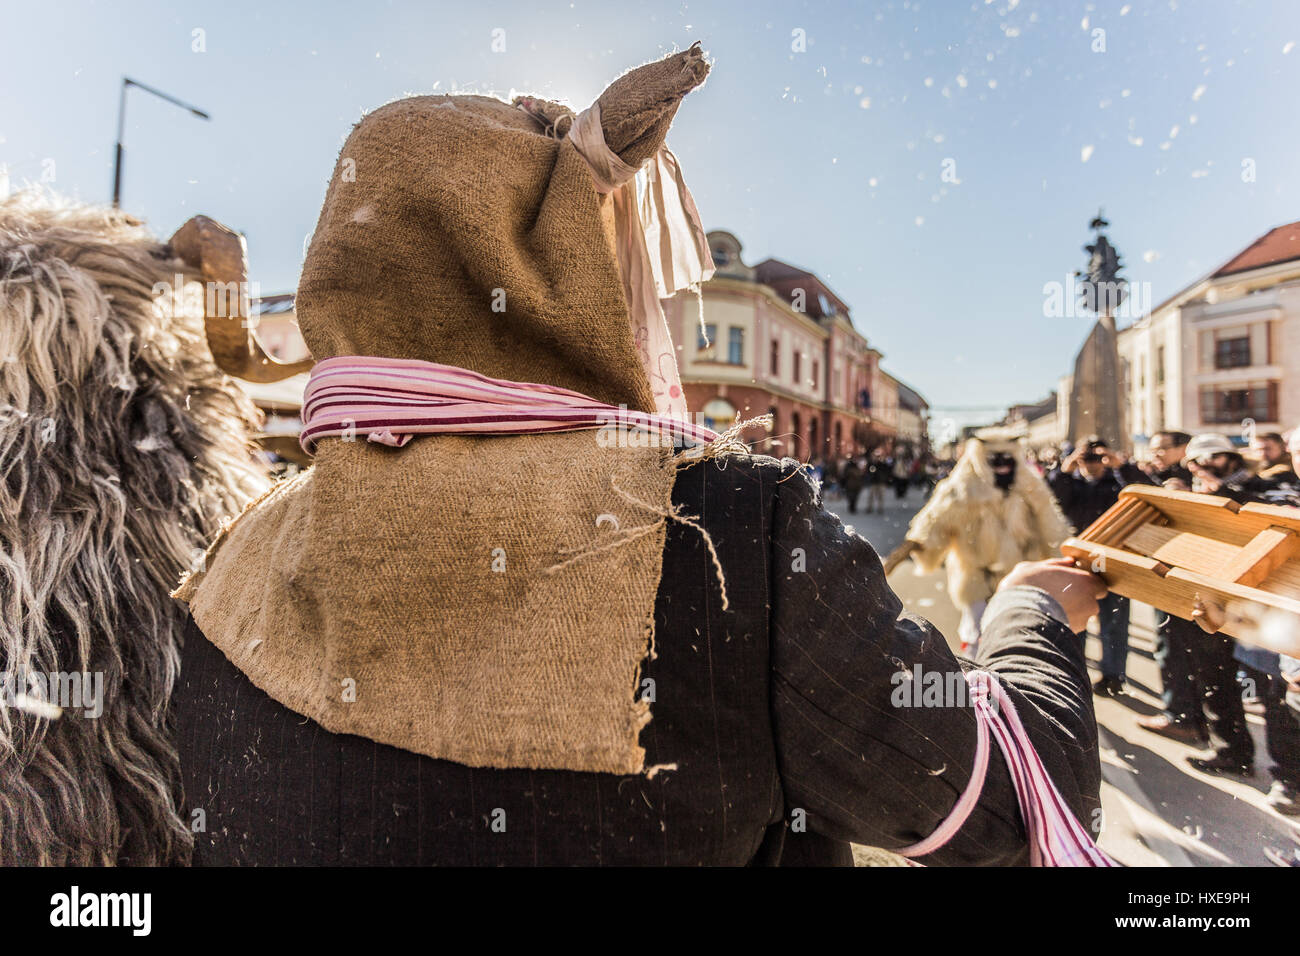 Arriving at the main square of Mohacs with the 'jankeles', during the annual Buso festivities in Mohacs, Hungary Stock Photo